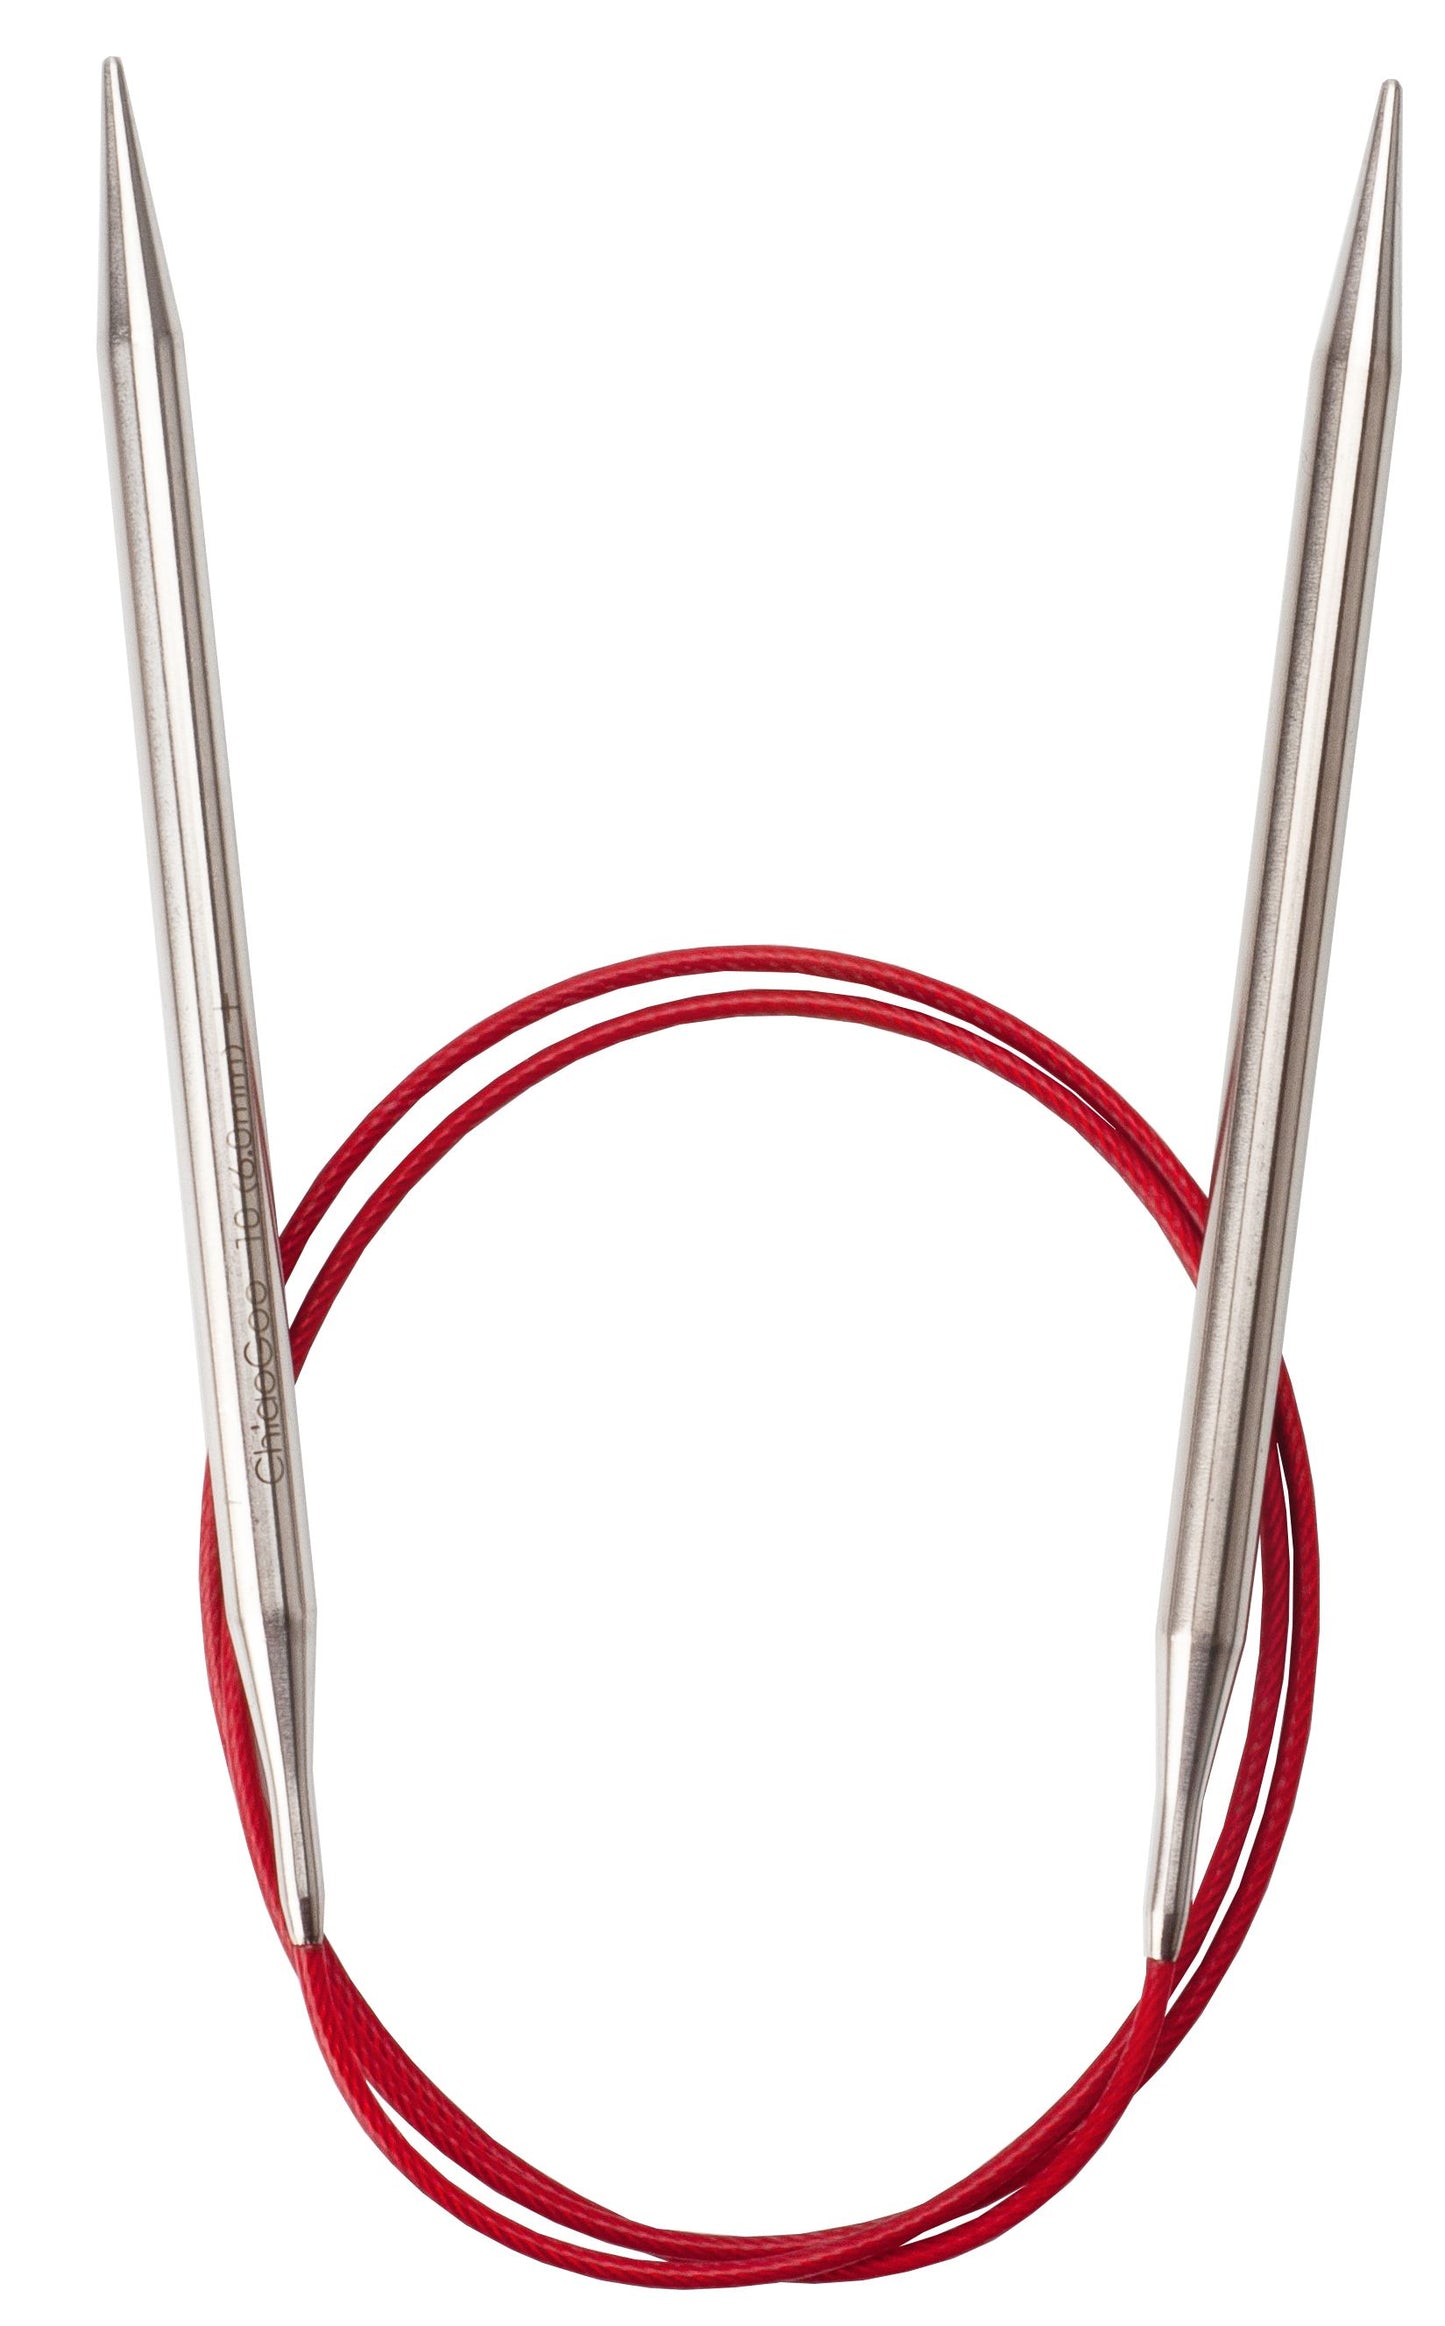 ChiaoGoo Red Lace Fixed Circular Needles sizes 1.5mm to 3.75mm (US 000 to 5)